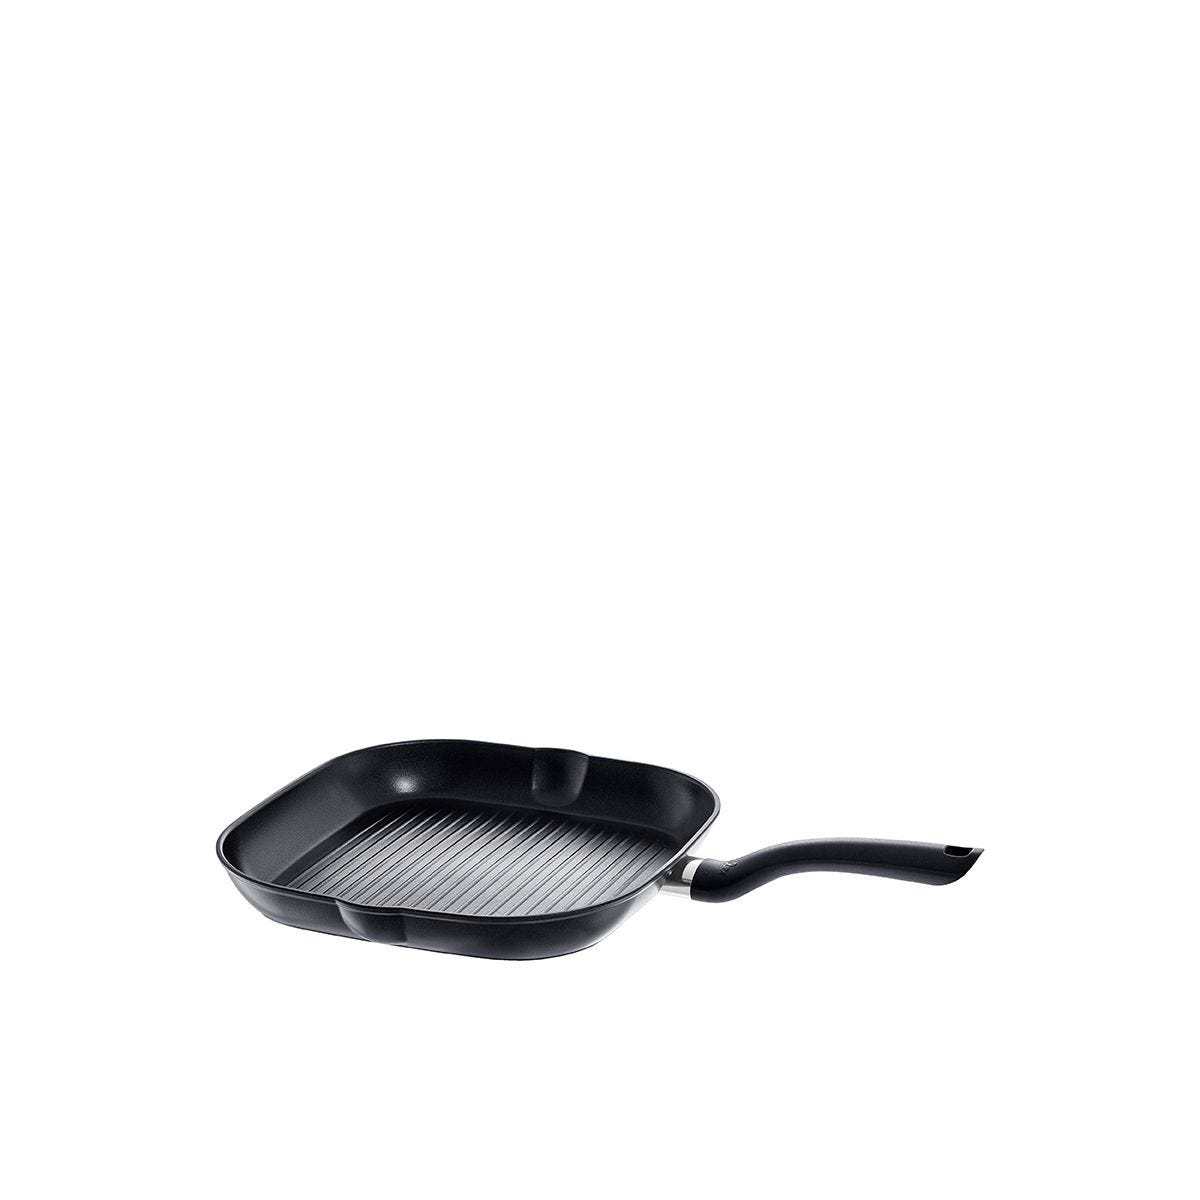 Cenit® Nonstick Grill Pan, 11"